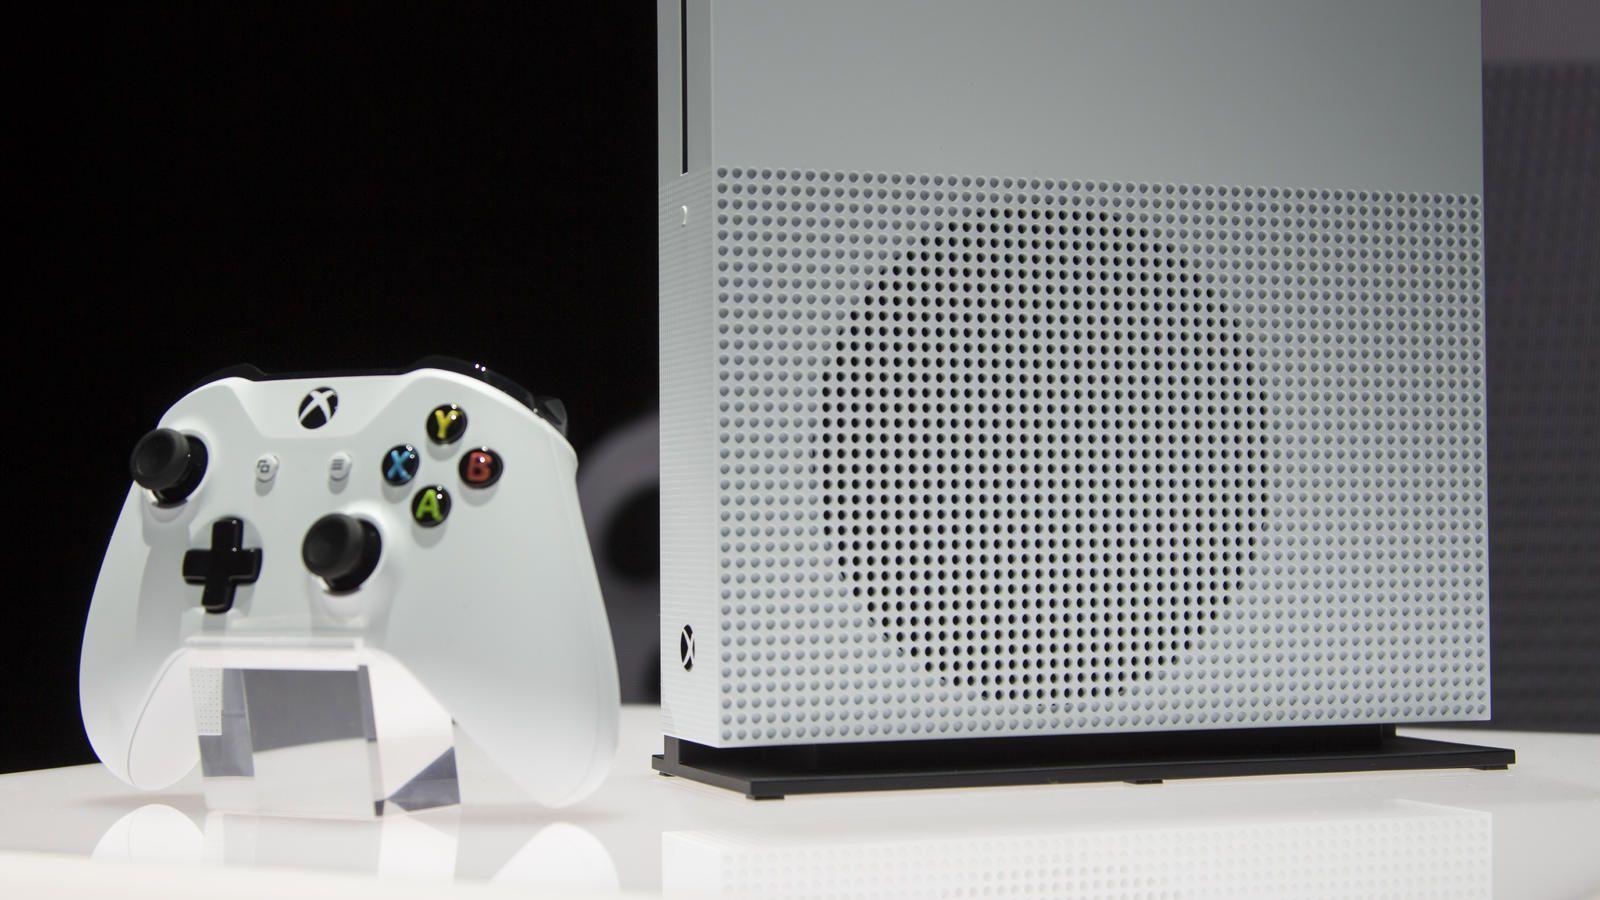 ICXM.net reveals Xbox One S to be much smaller than